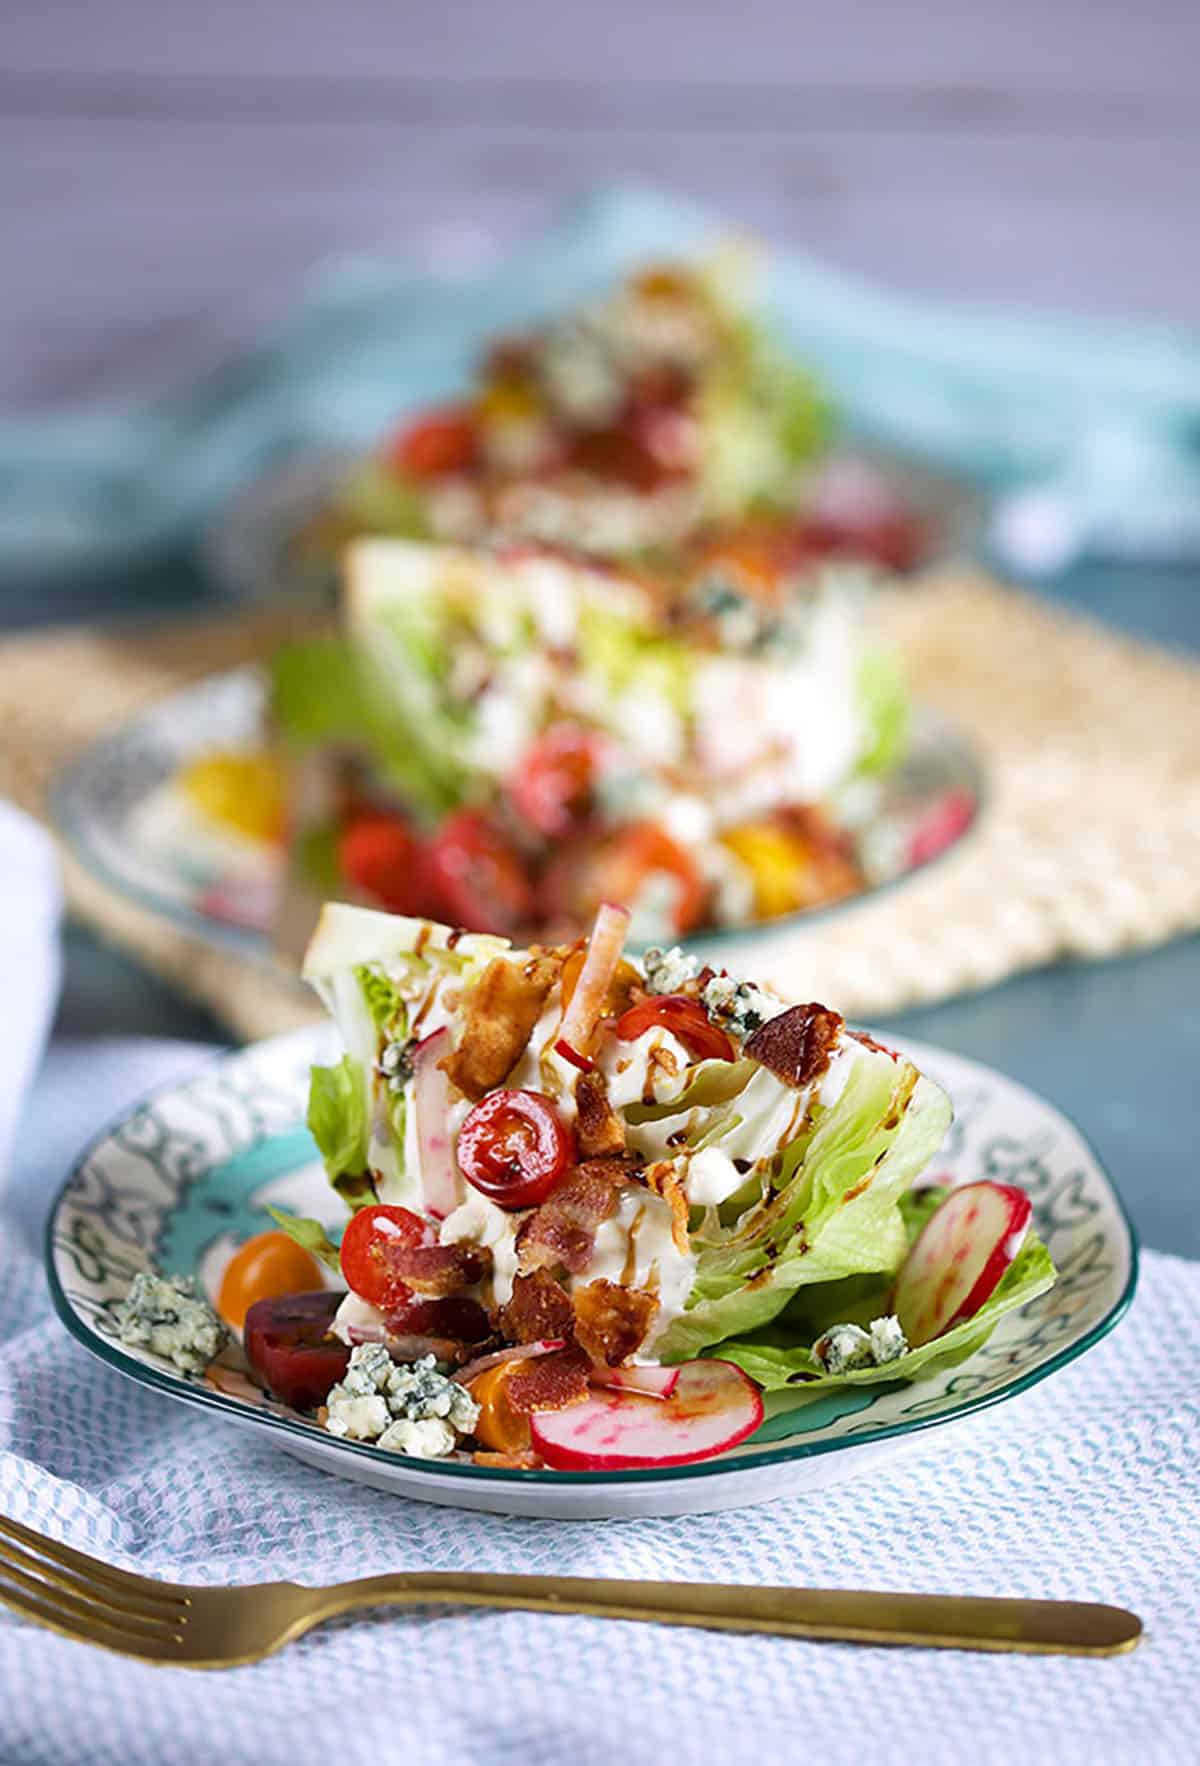 Row of three Loaded Iceberg Wedge Salads on white and blue plates with a gold fork on a blue background